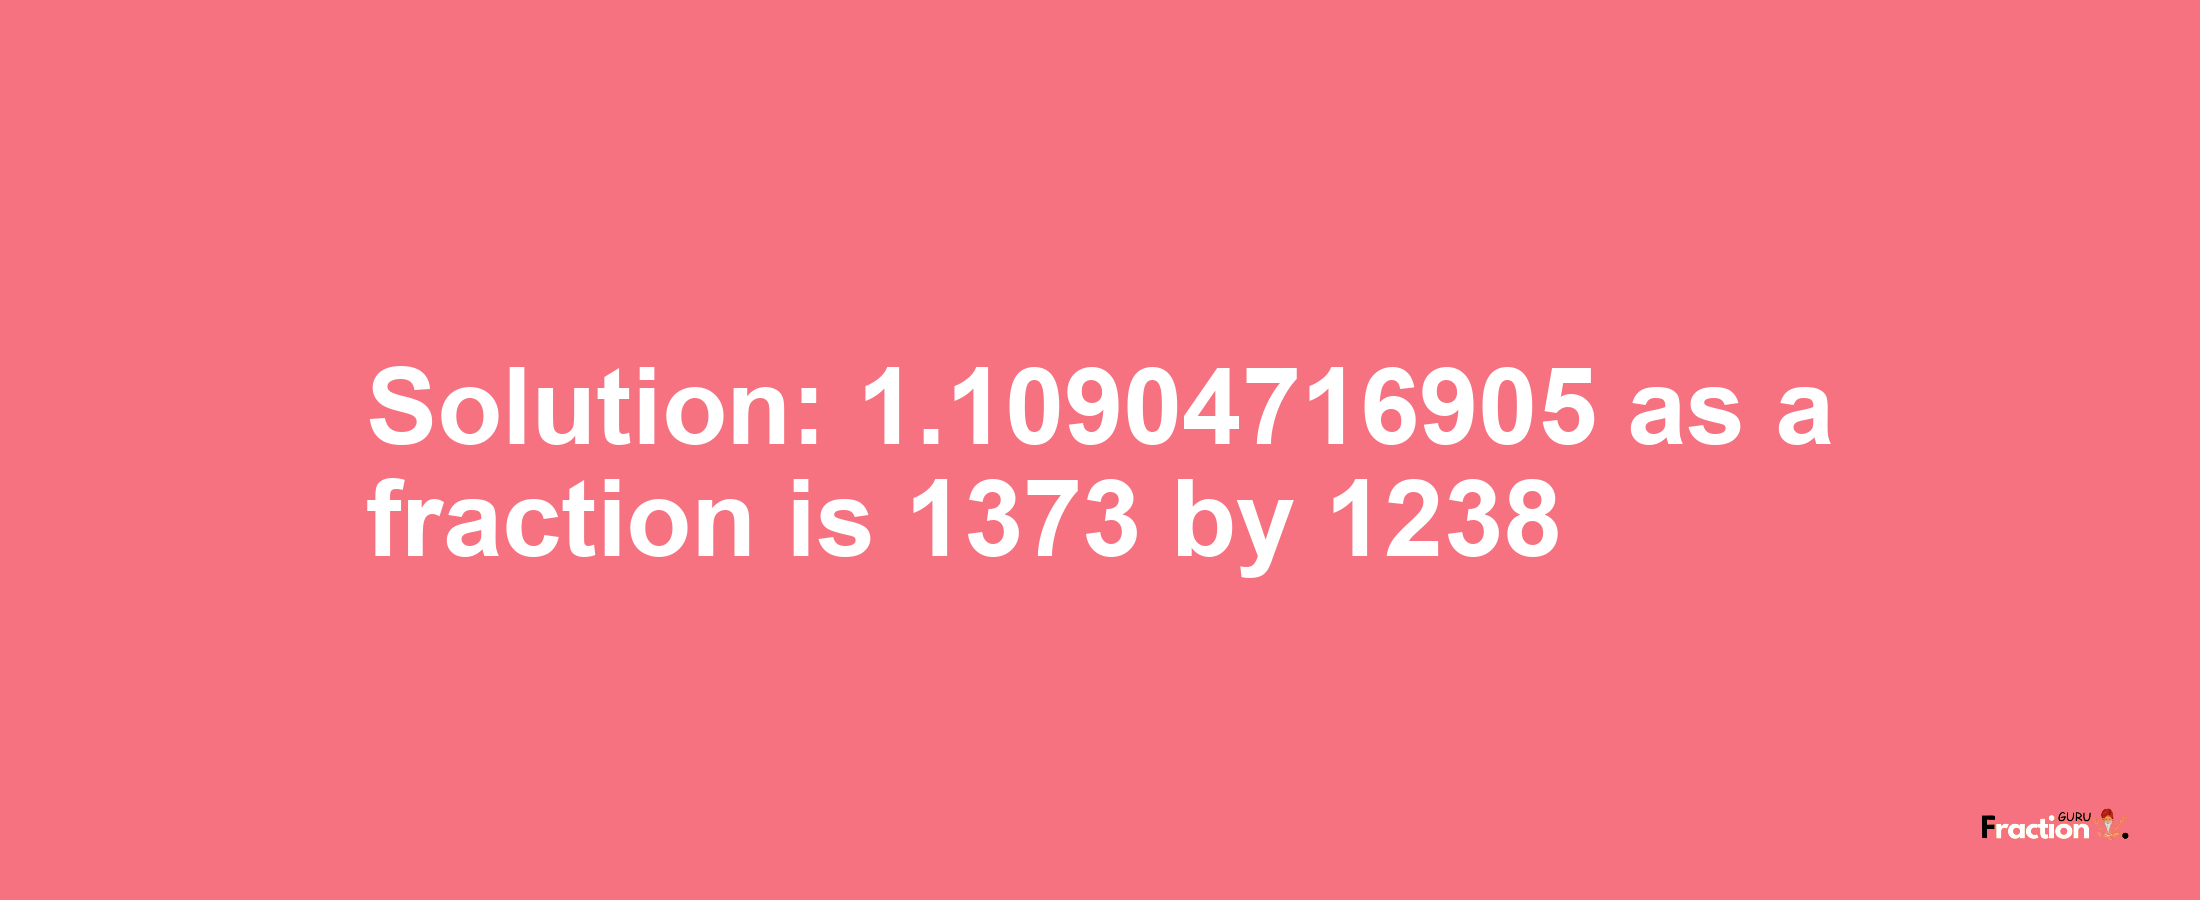 Solution:1.10904716905 as a fraction is 1373/1238